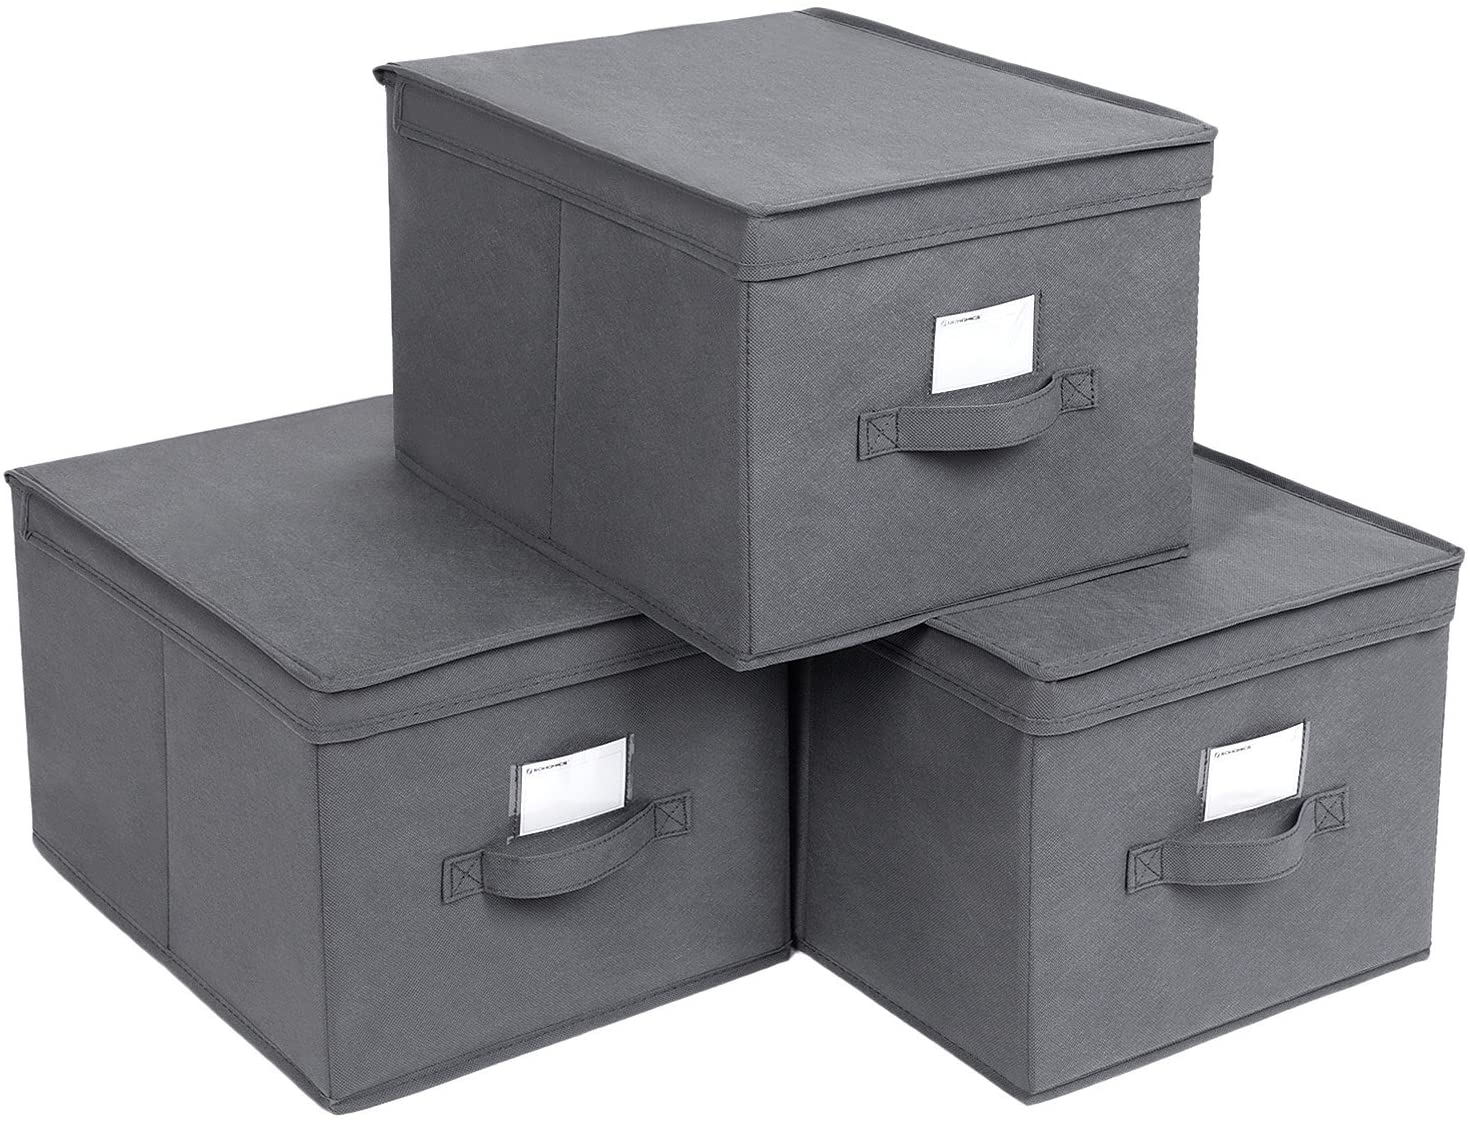 Importance Of Storage Boxes With Lids | Storables